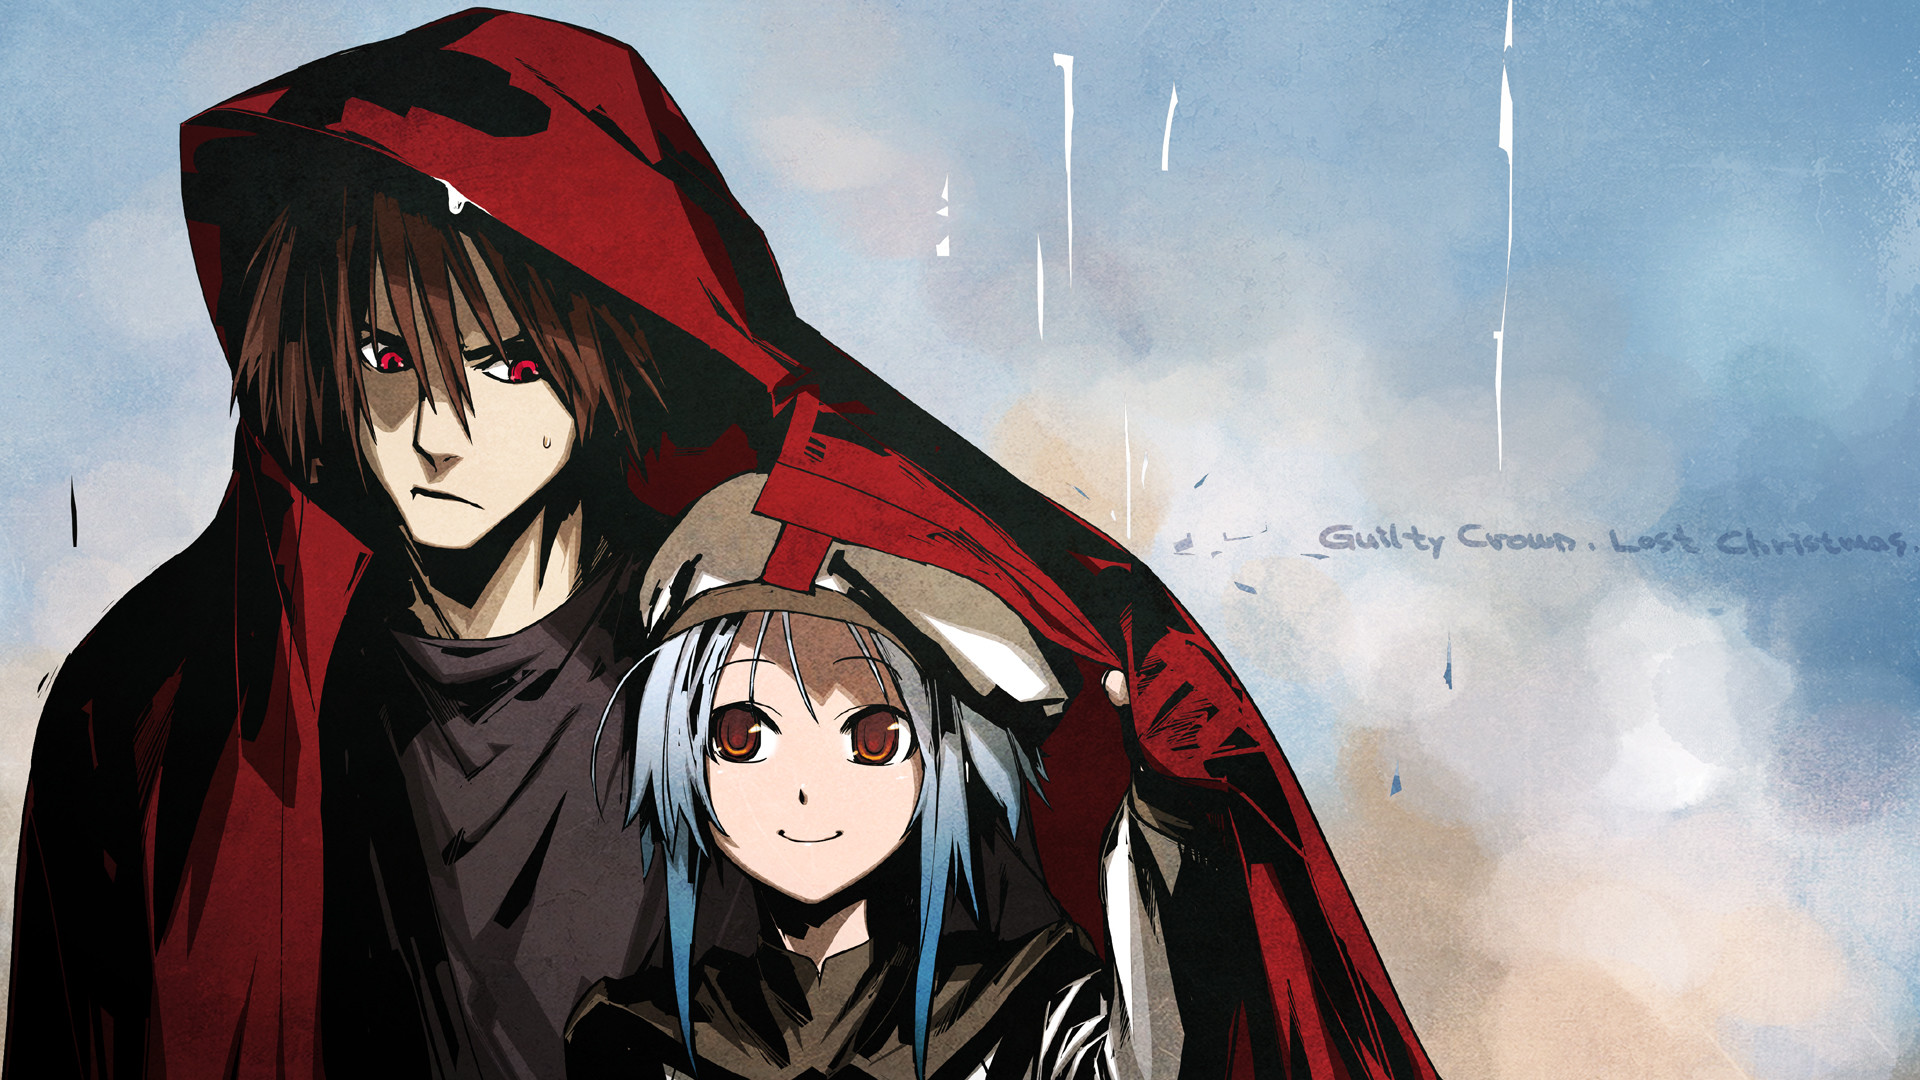 1920x1080 View Fullsize GUILTY CROWN: Lost Christmas Image